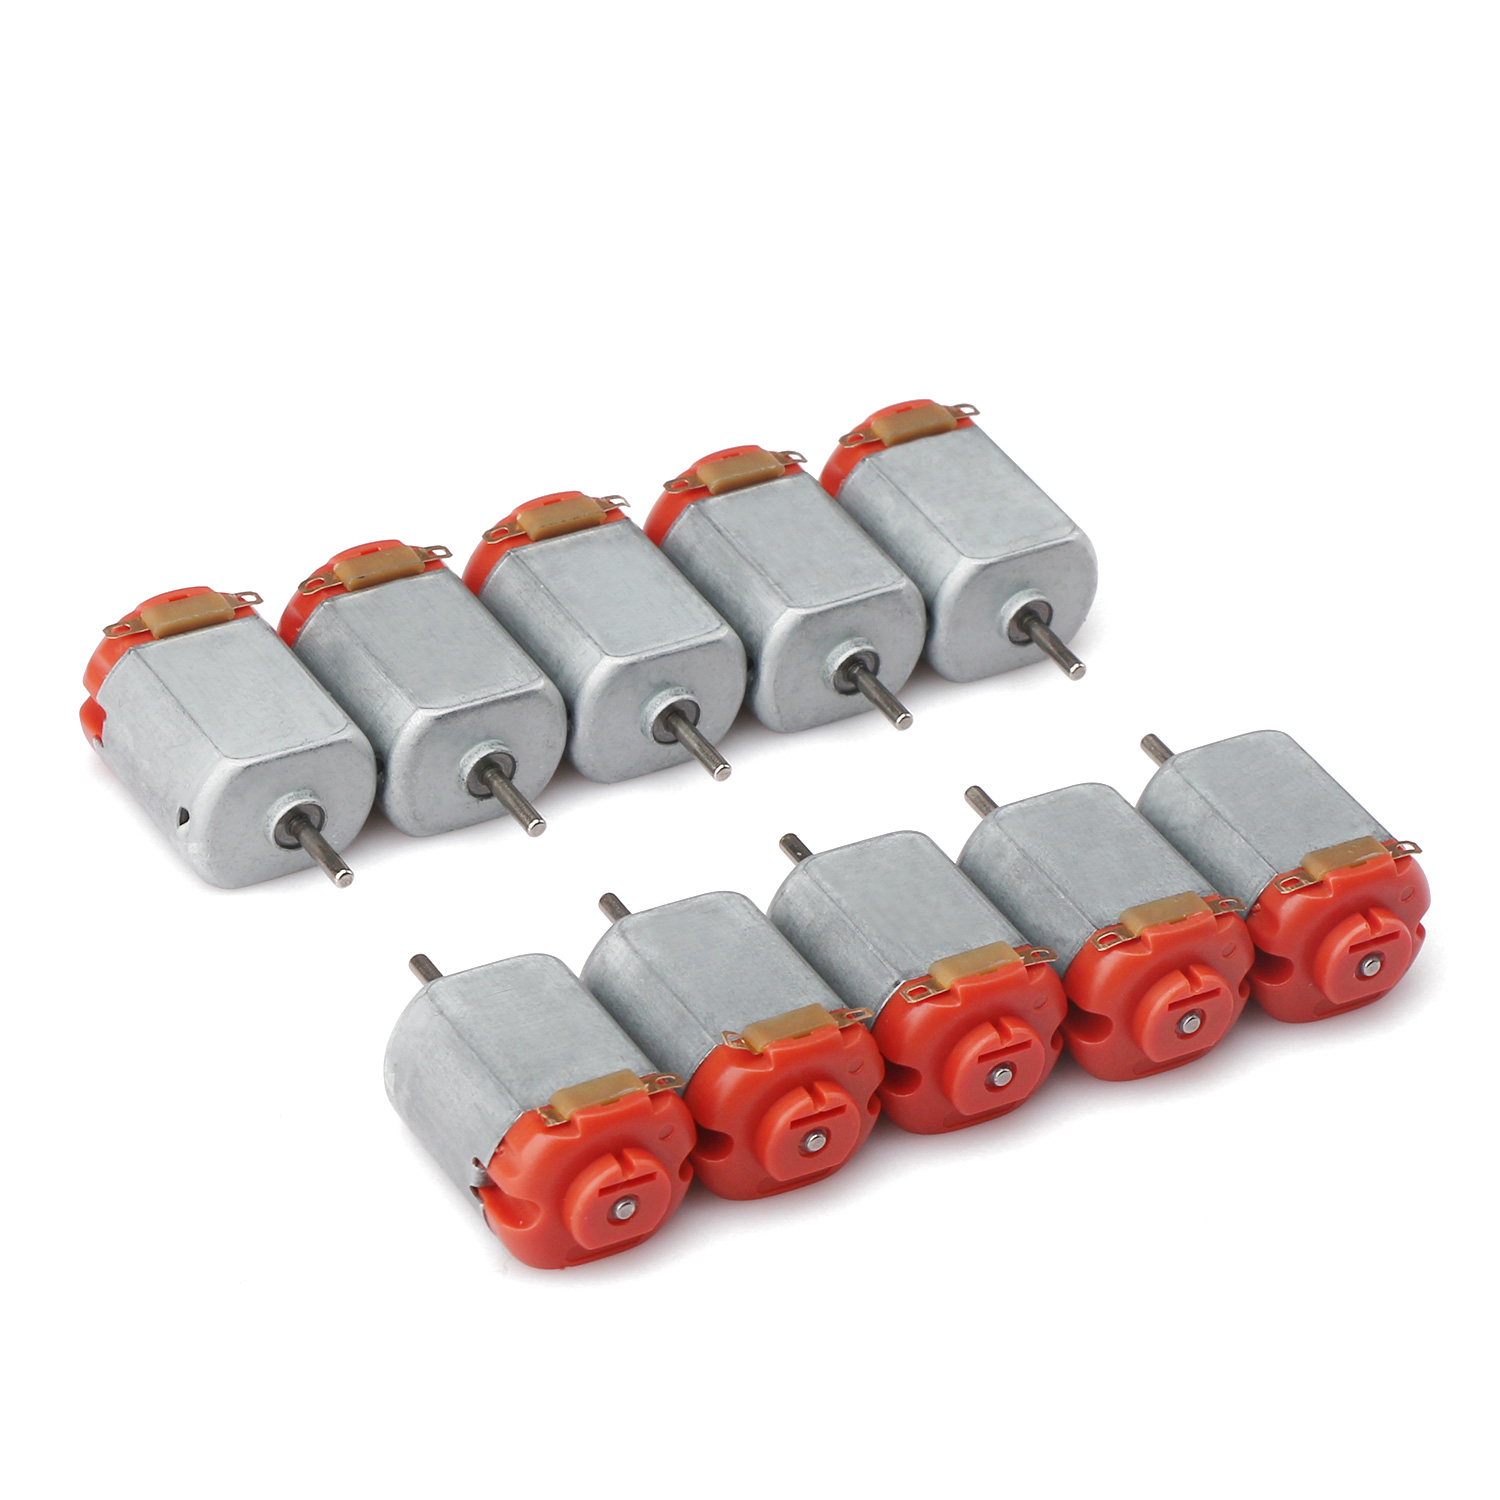 5X New 130 Micro Motor Toy Motors DC Small Motor Experiment Four Wheel Drive Car